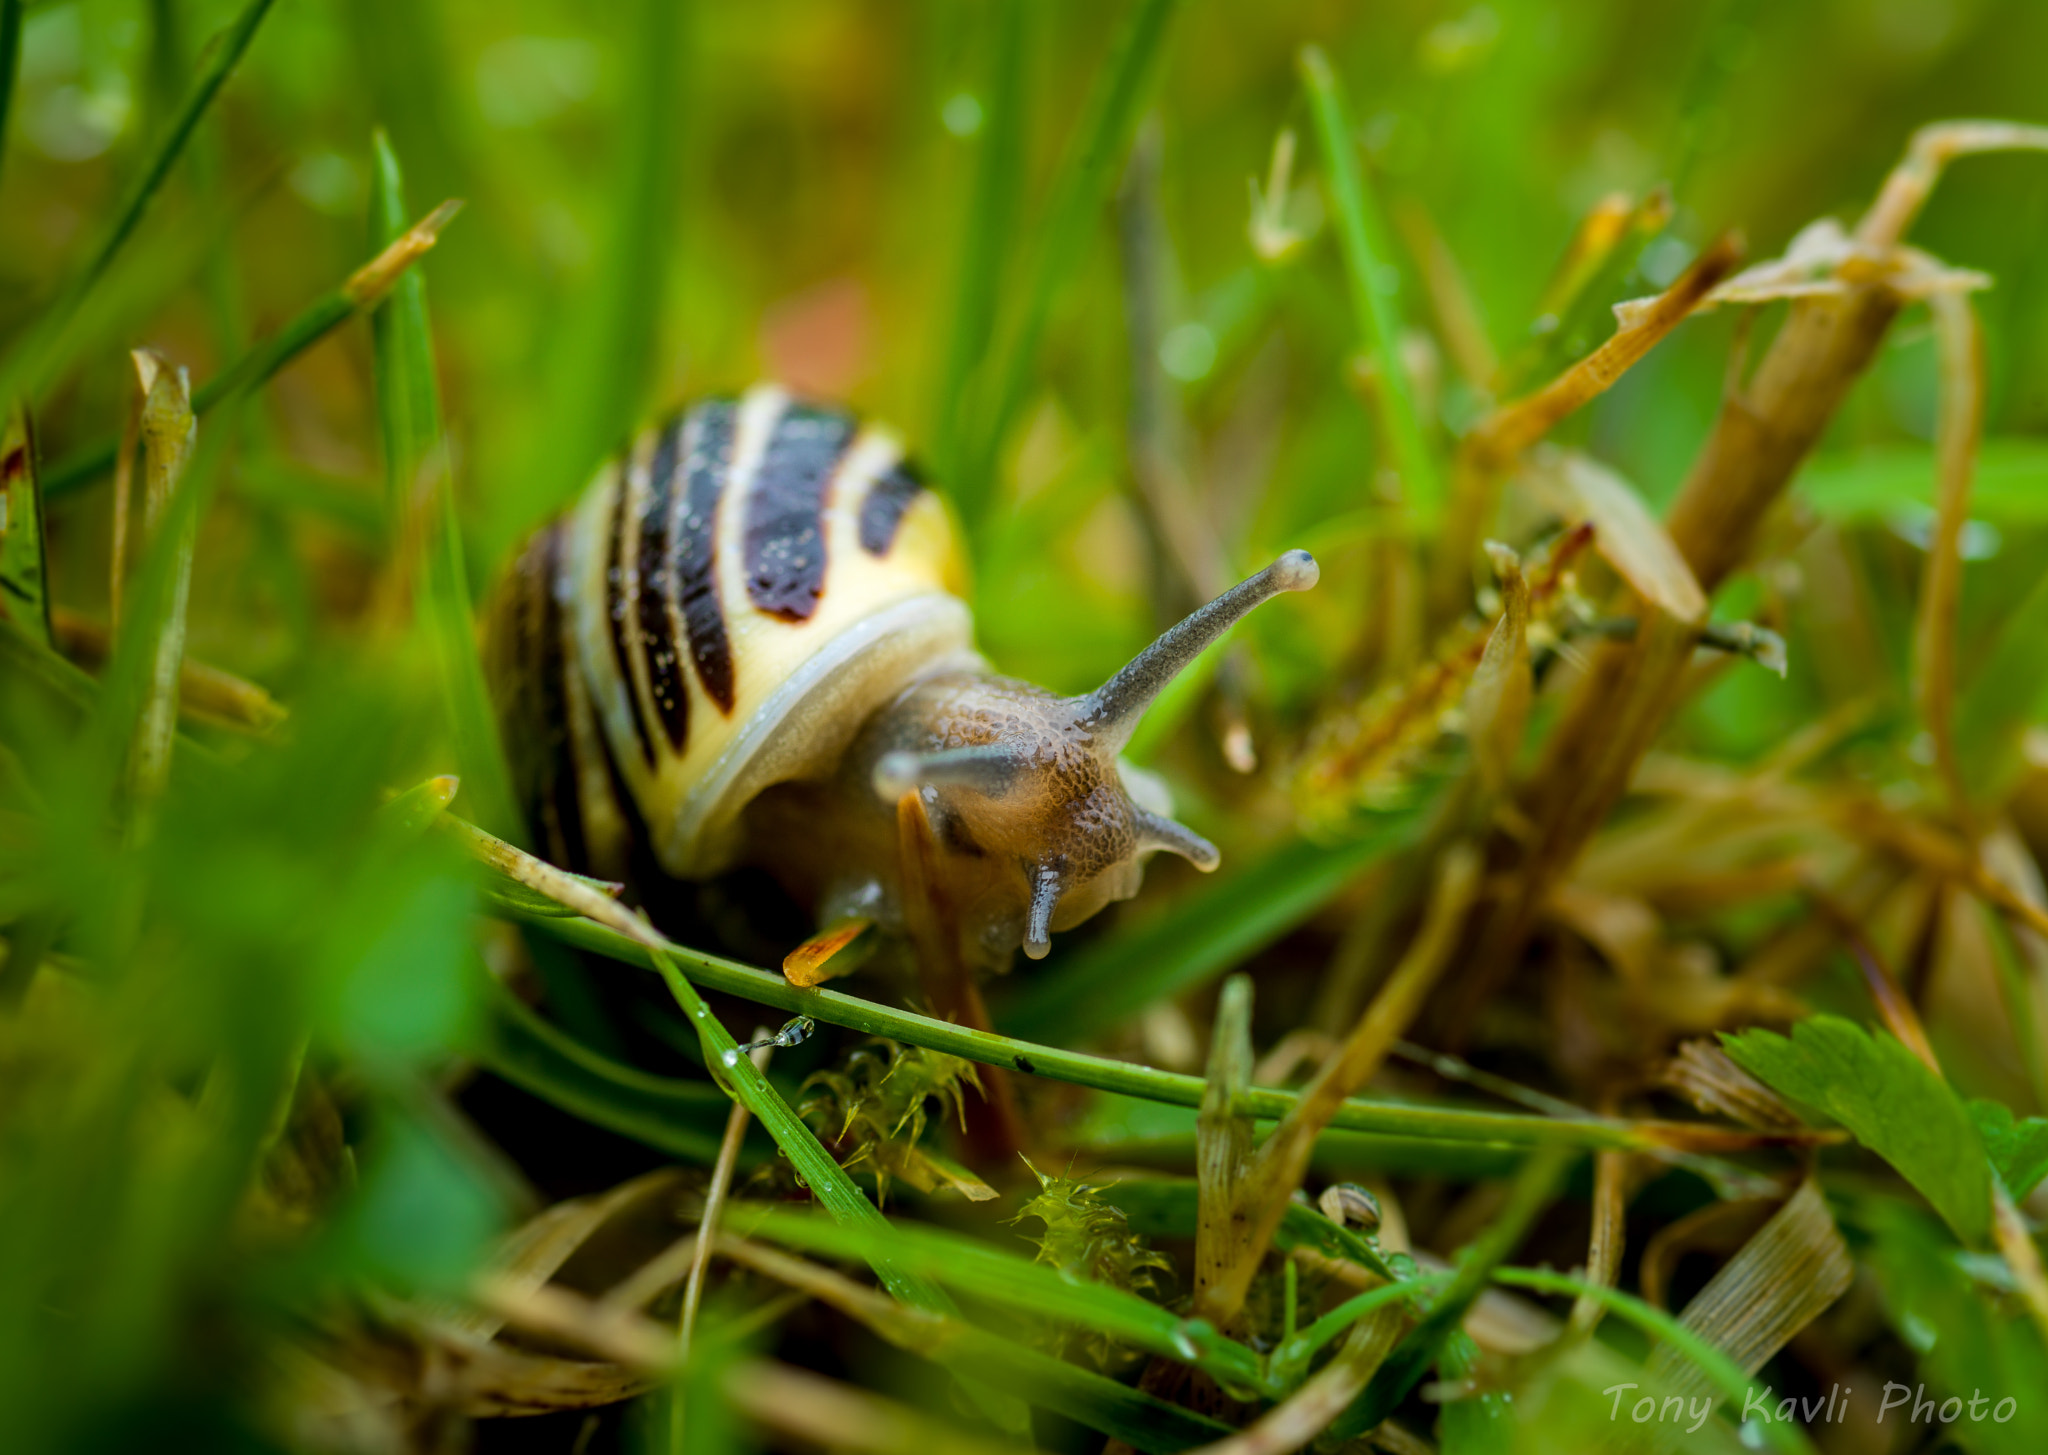 HC 120 sample photo. The snail in the grass photography